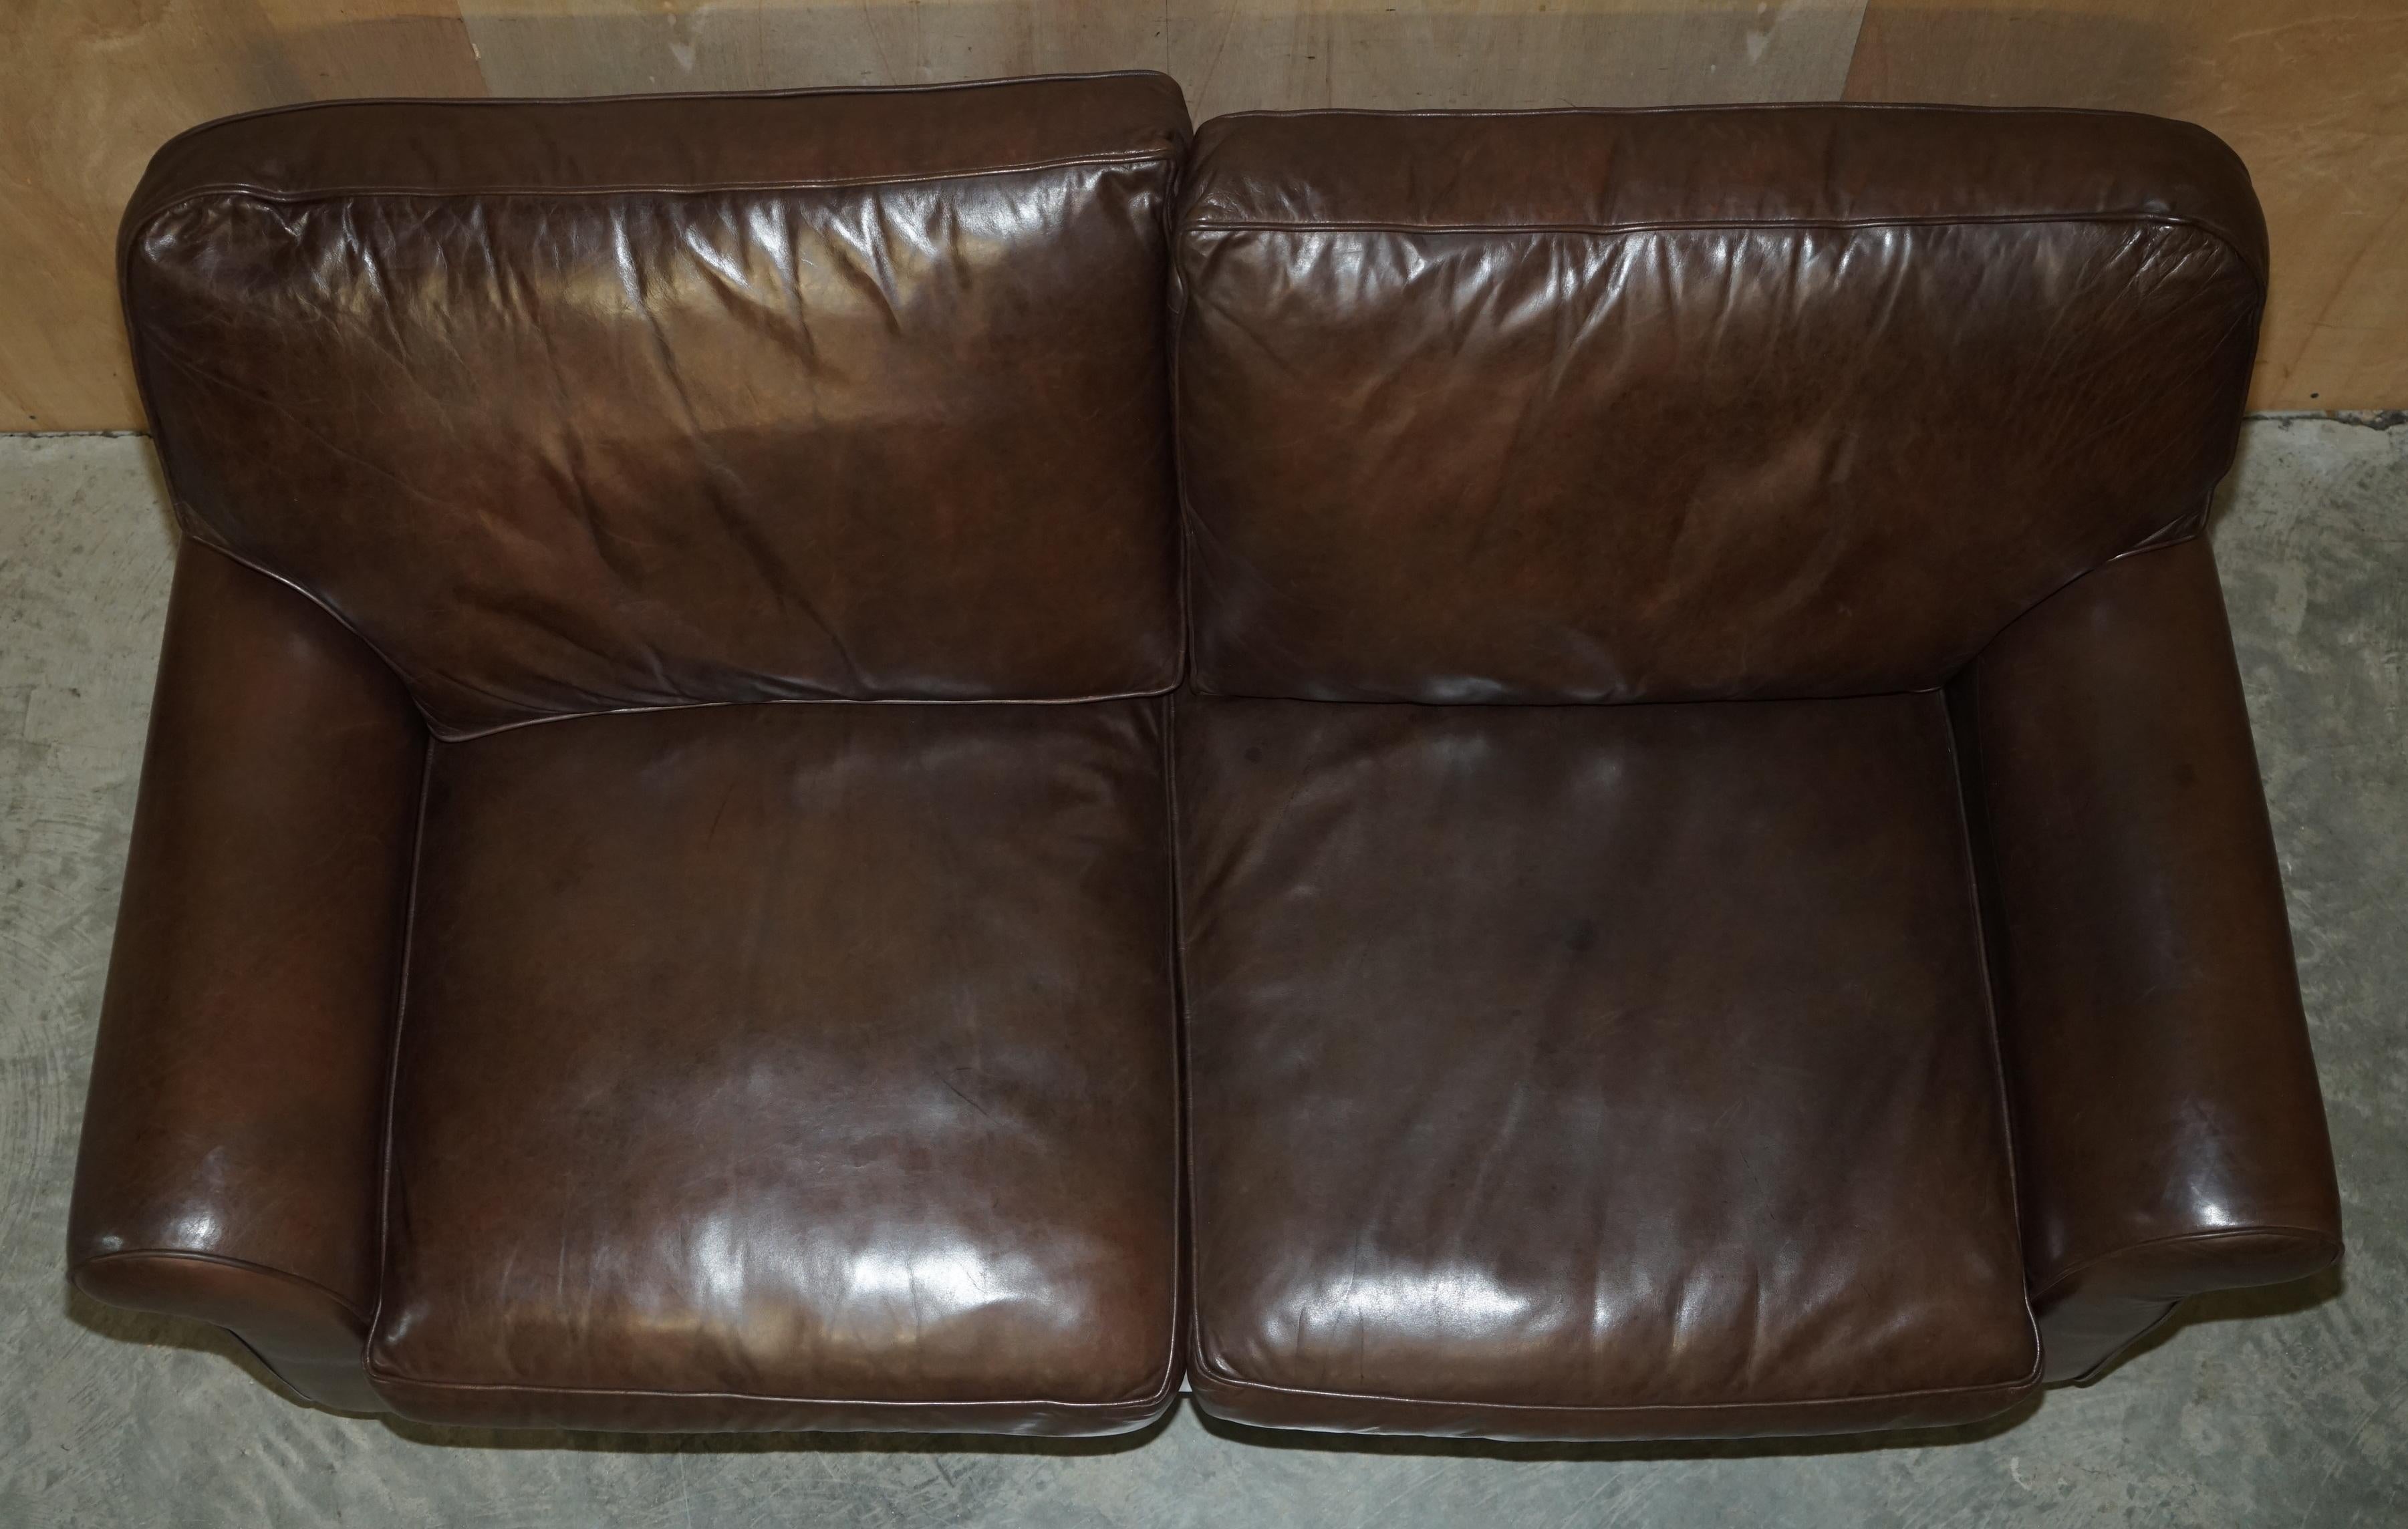 LOVELY HERITAGE BROWN LEATHER LAURA ASHLEY MORTIMER SOFABED IN SEHR GUTEM ZUSTAND im Angebot 3